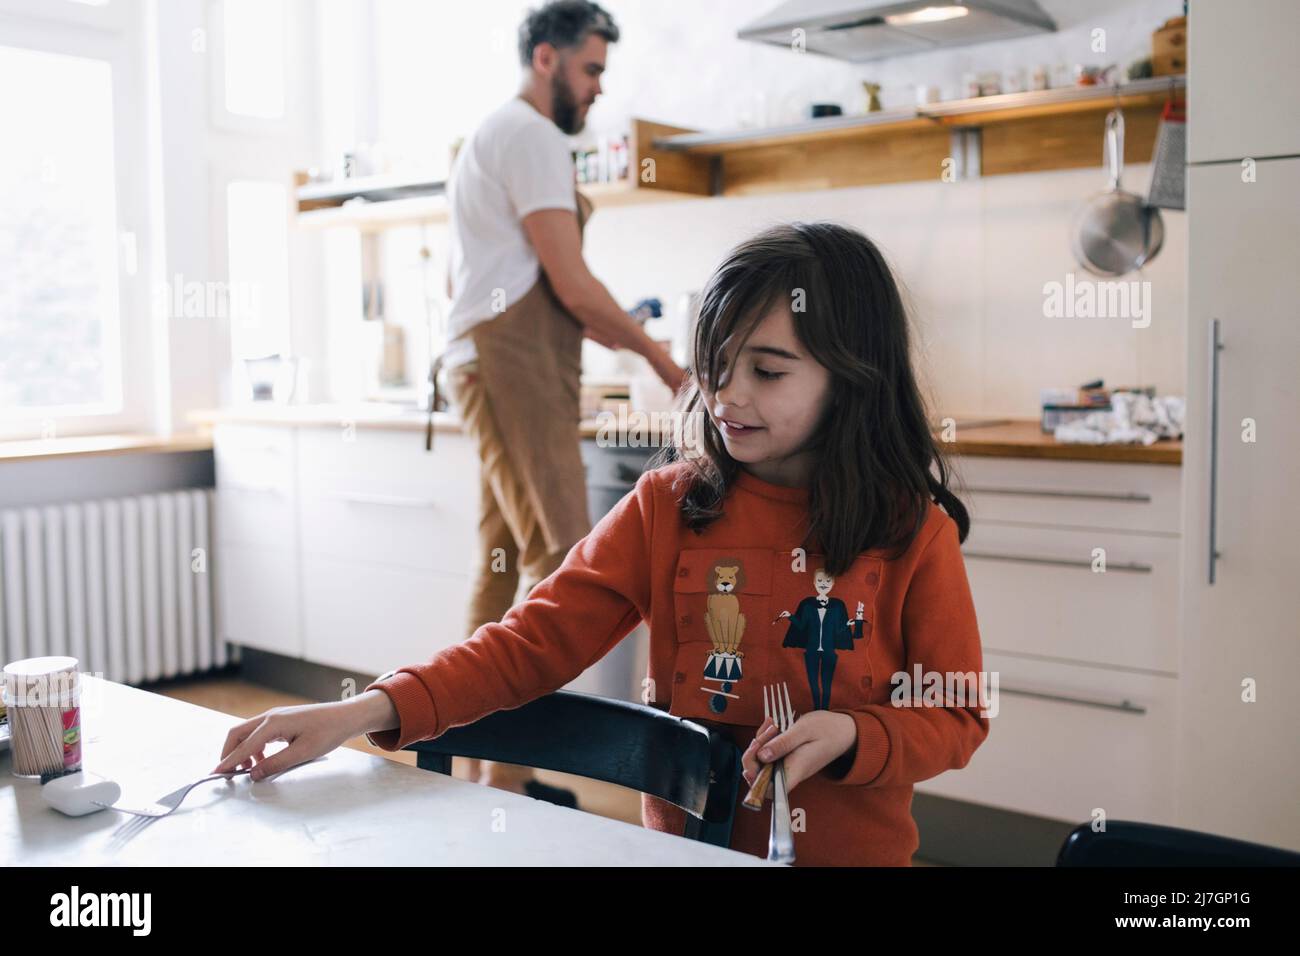 Girl arranging fork on dinging table while father doing chores in kitchen Stock Photo